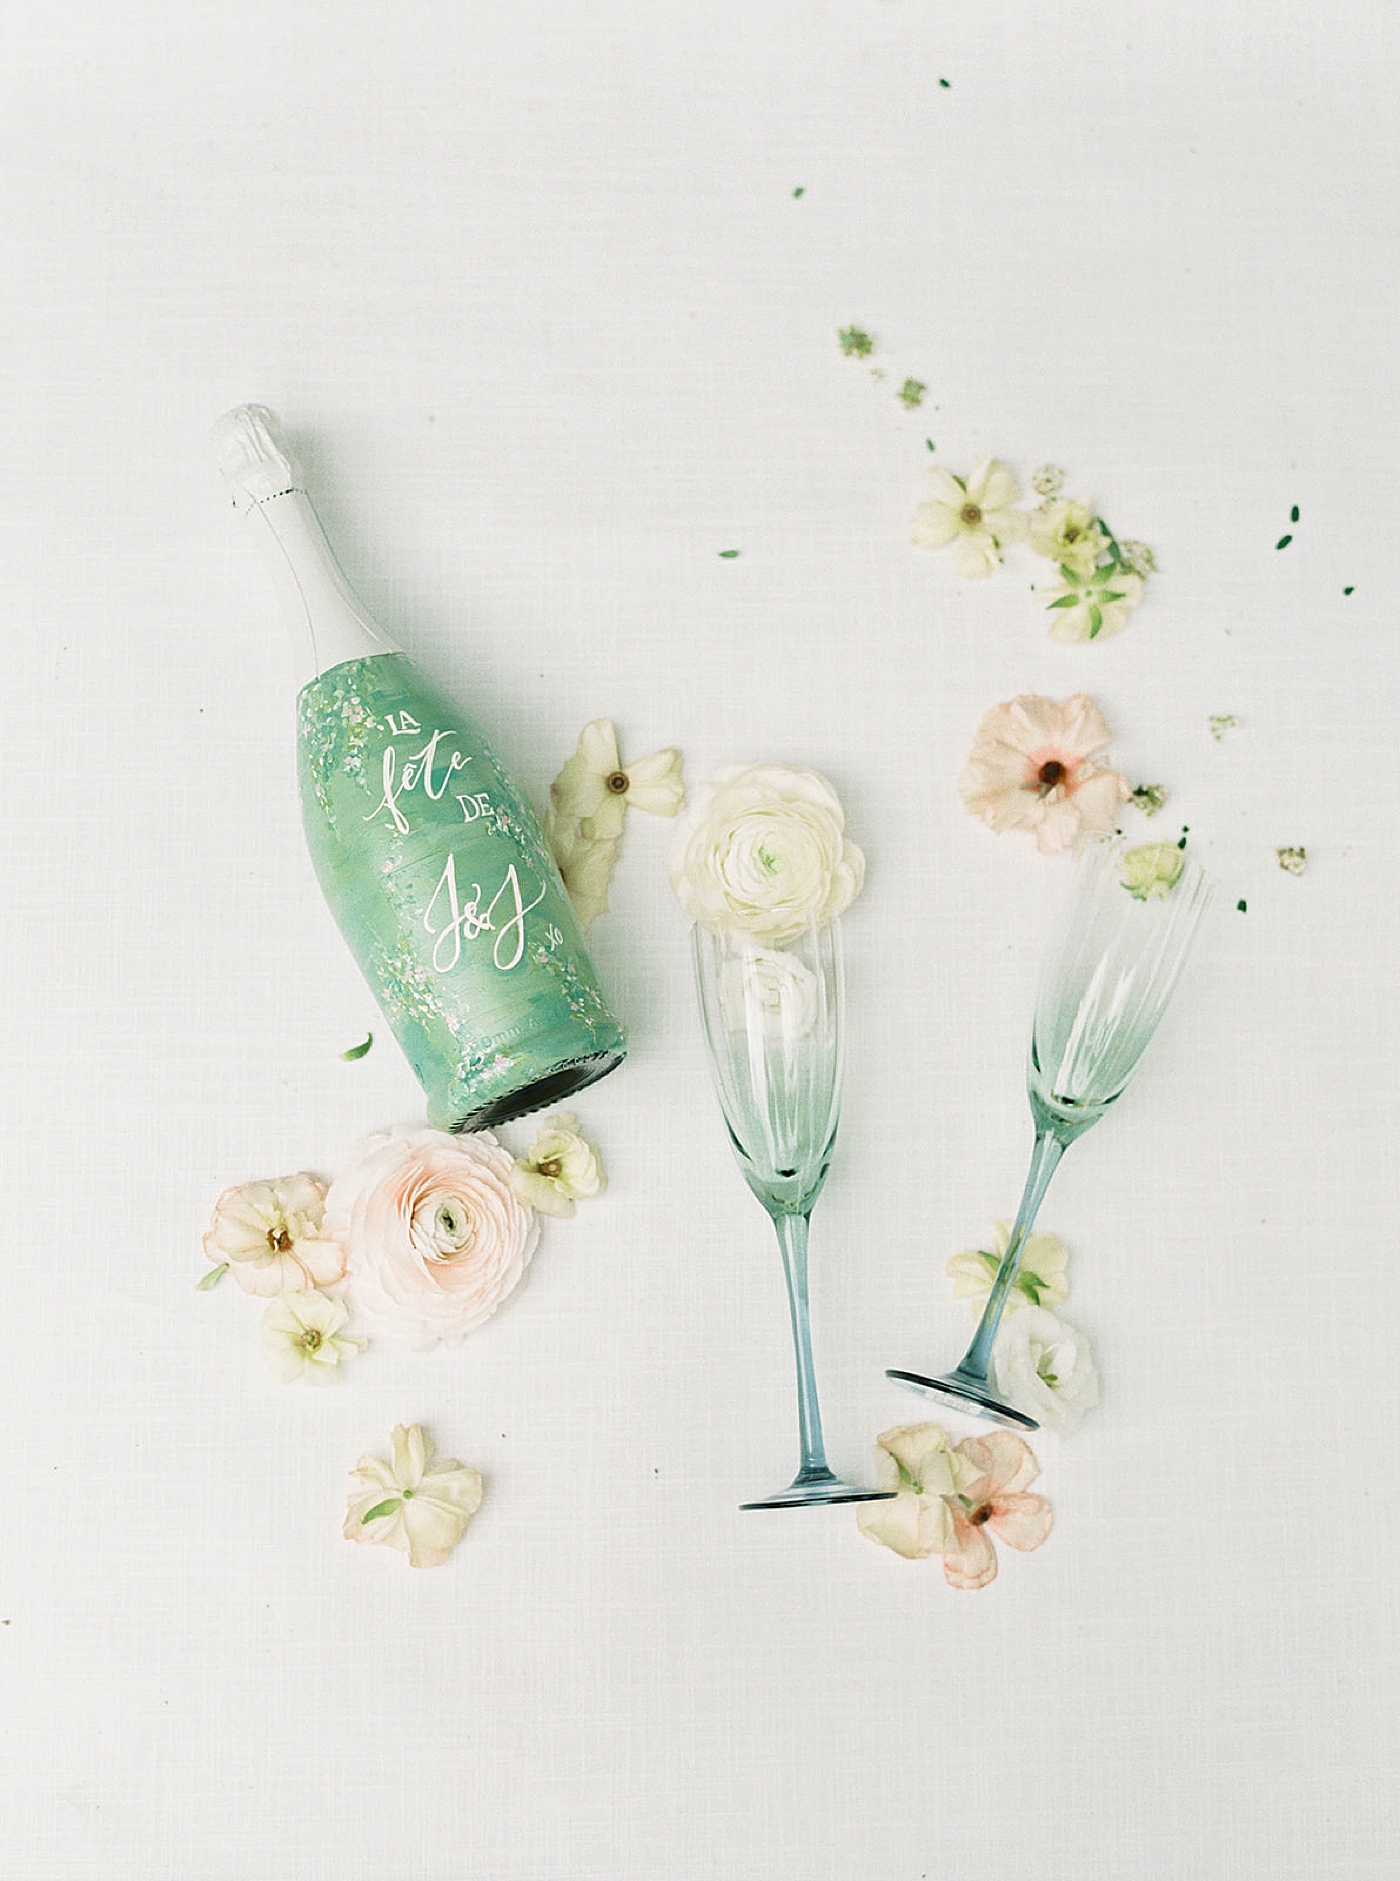 Painted champagne bottle with pale blue champagne flutes with florals | Carters Event Co